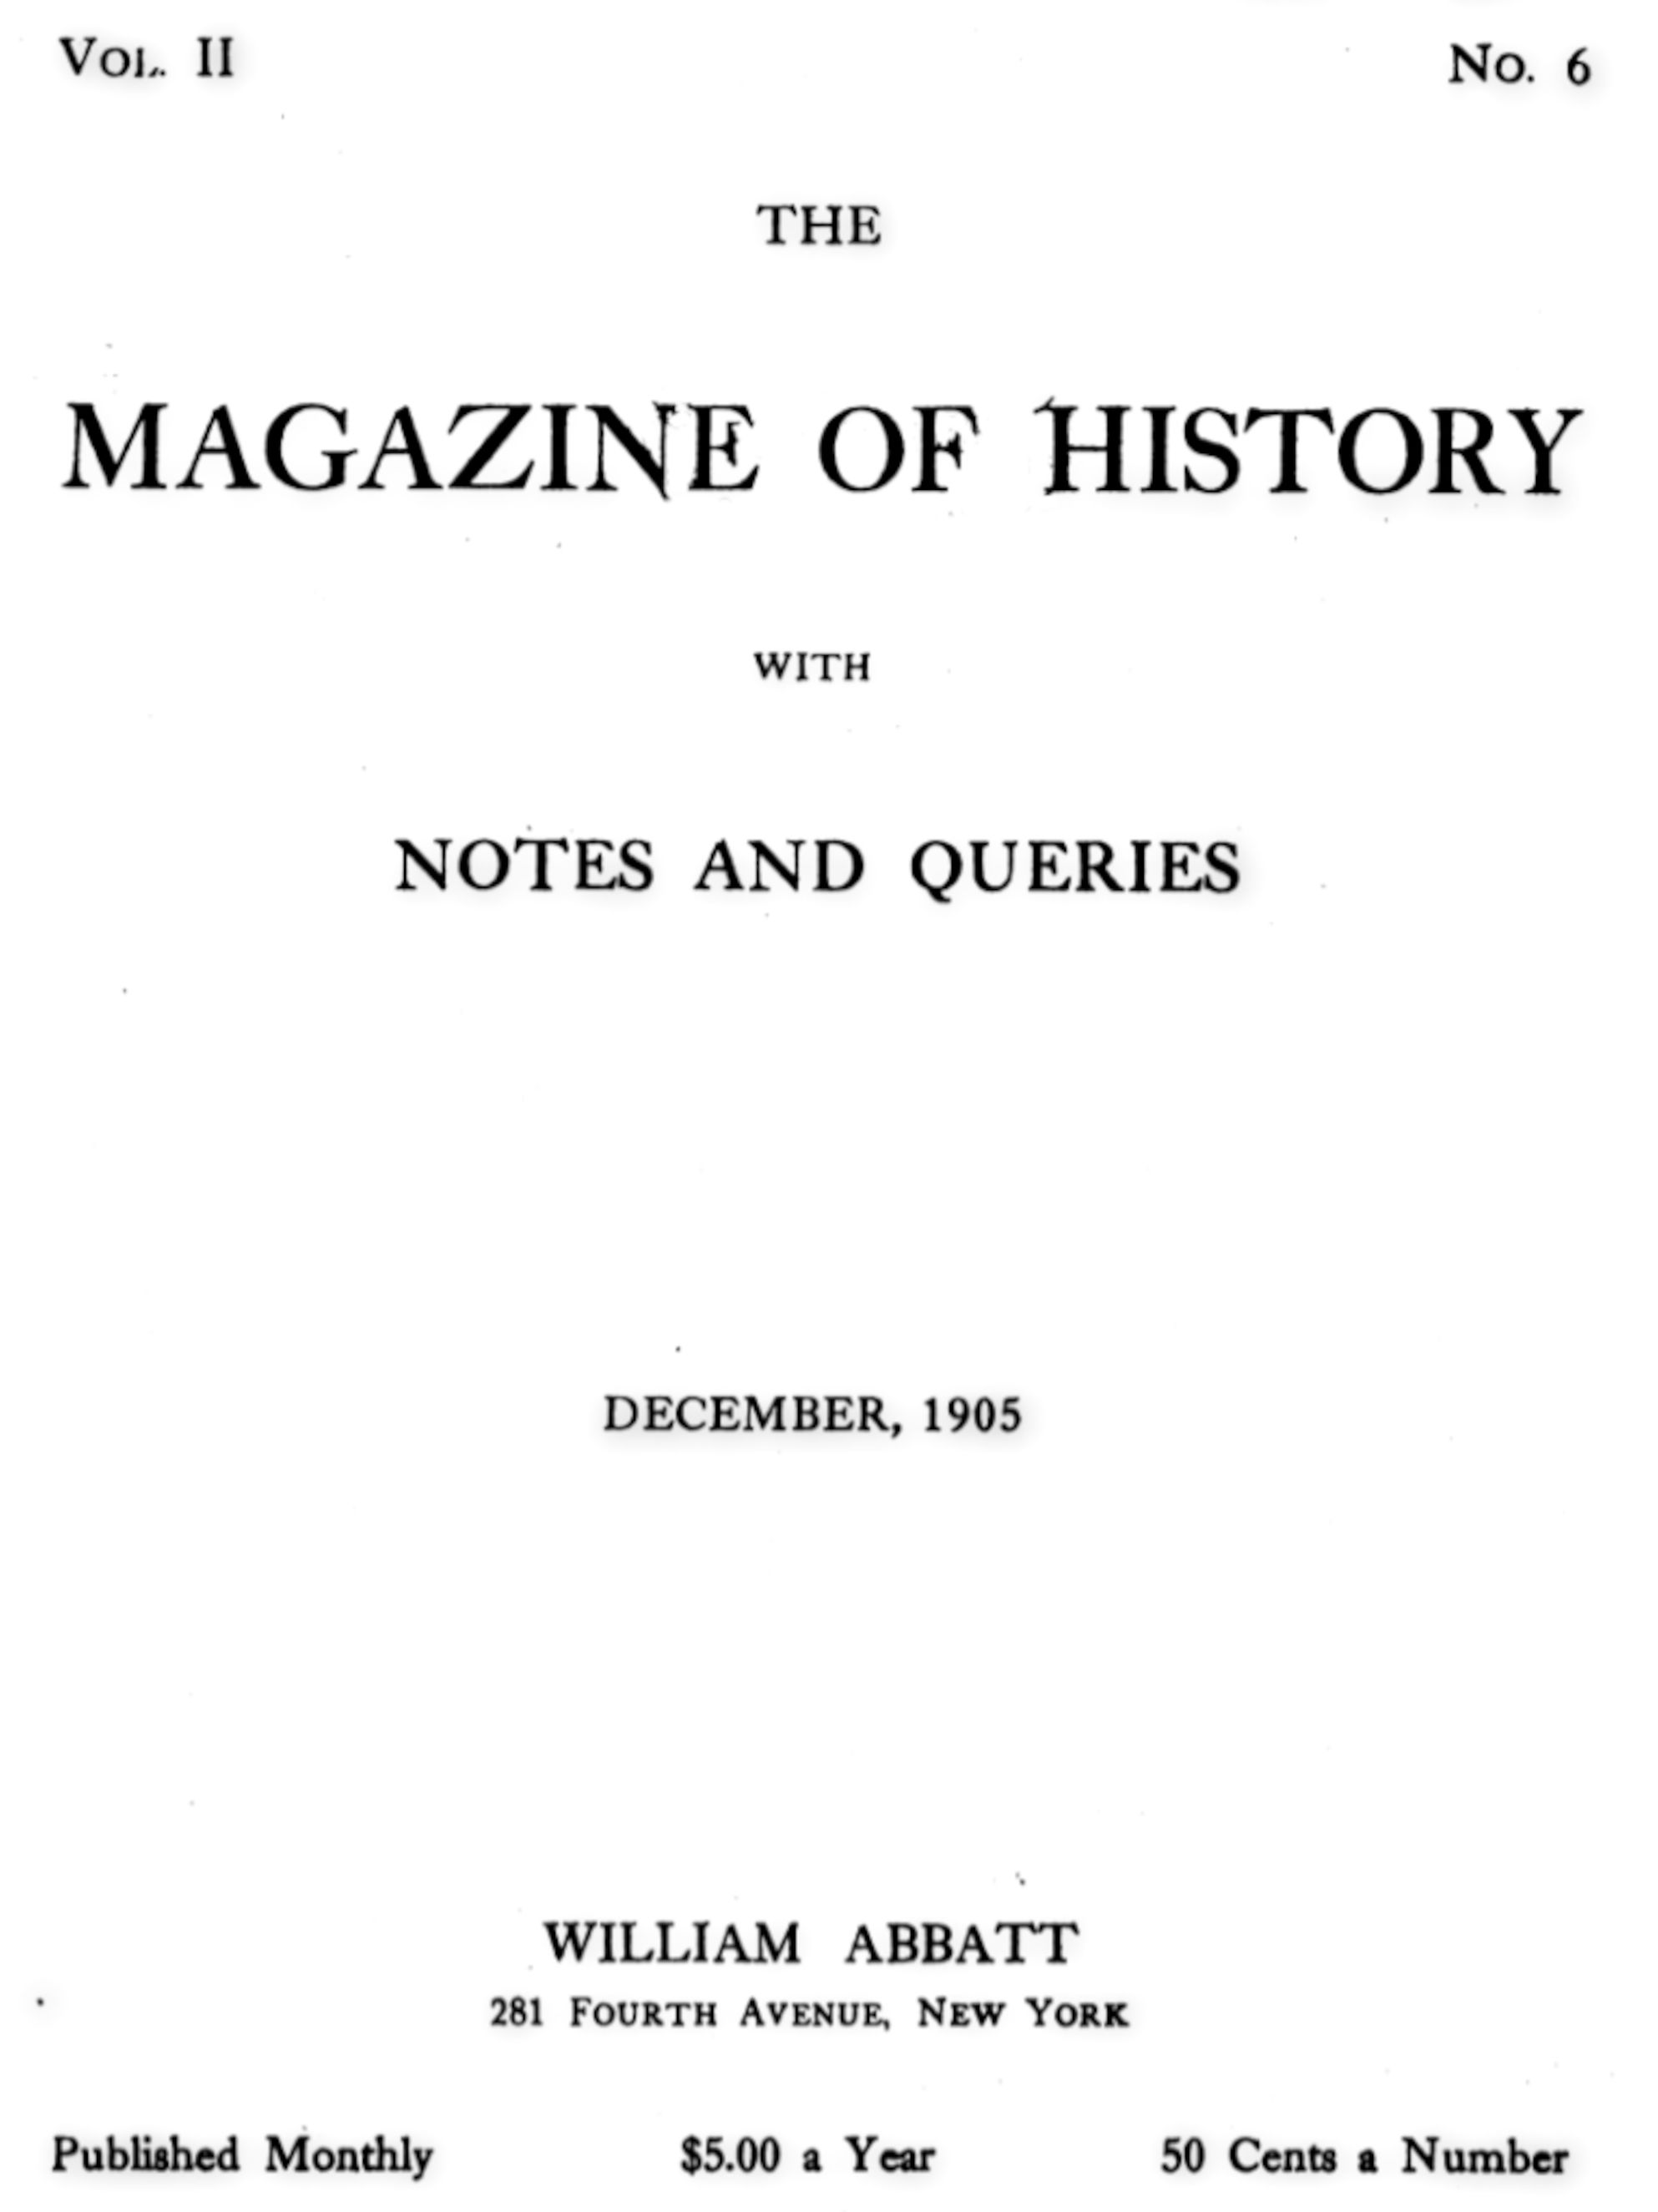 The magazine of history with notes and queries, Vol. II, No. 6, December 1905